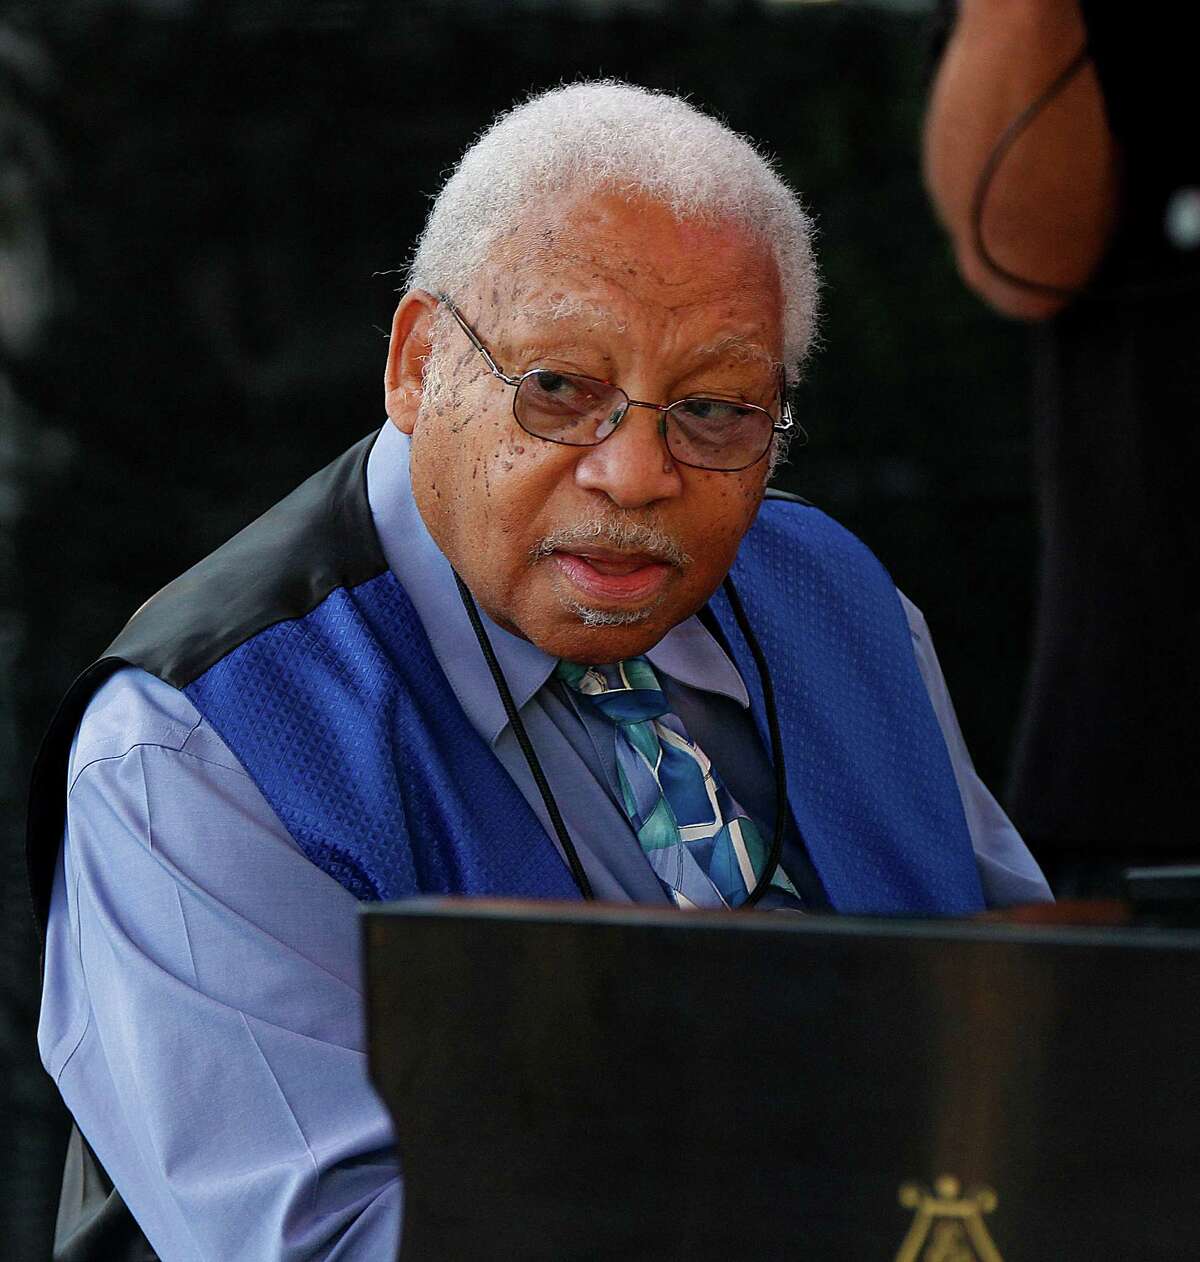 Ellis Marsalis performs at a sunrise concert marking International Jazz Day in New Orleans, Monday, April 30, 2012. The performance, at Congo Square near the French Quarter, is one of two in the United States that day; the other is in the evening in New York. Thousands of people across the globe are expected to participate in International Jazz Day, including events in Belgium, France, Brazil, Algeria and Russia. (AP Photo/Gerald Herbert)